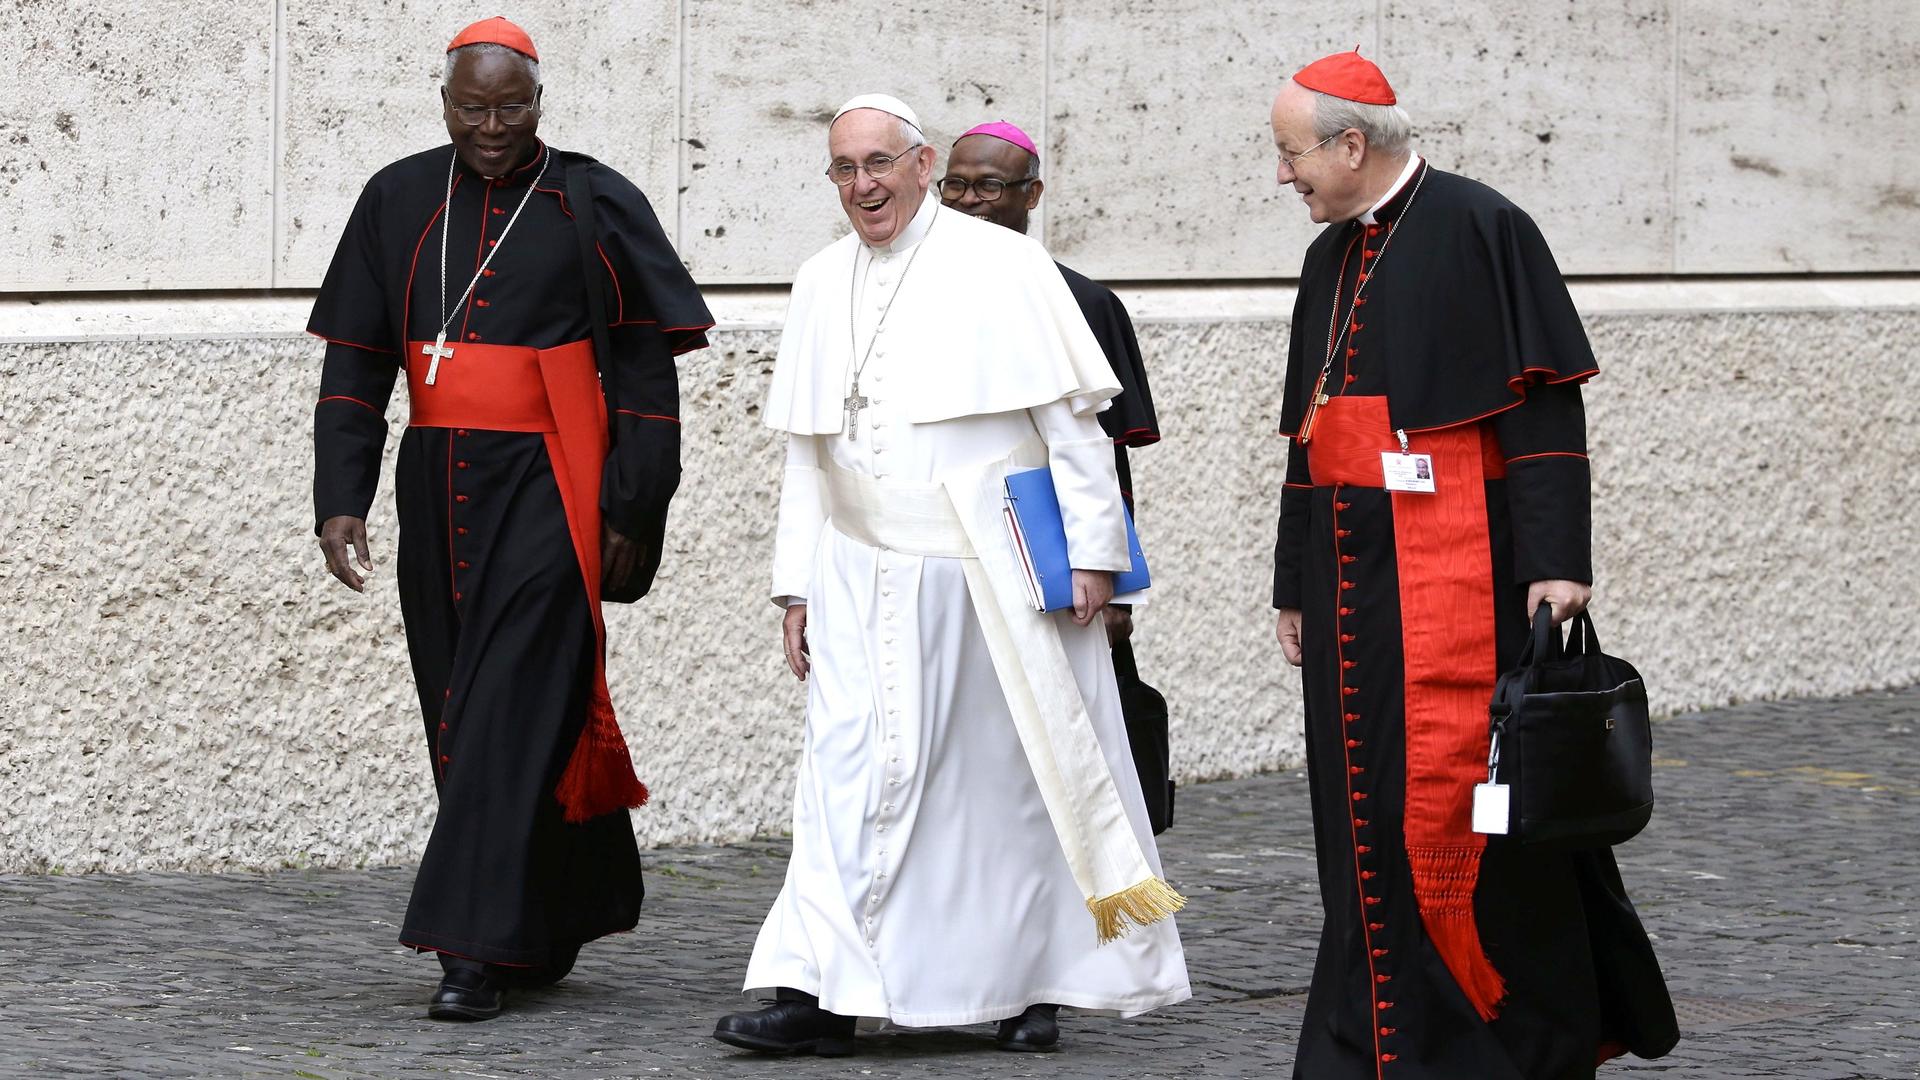 Pope Francis with cardinals as he arrives to lead the synod on the family at the Vatican October 9, 2015.